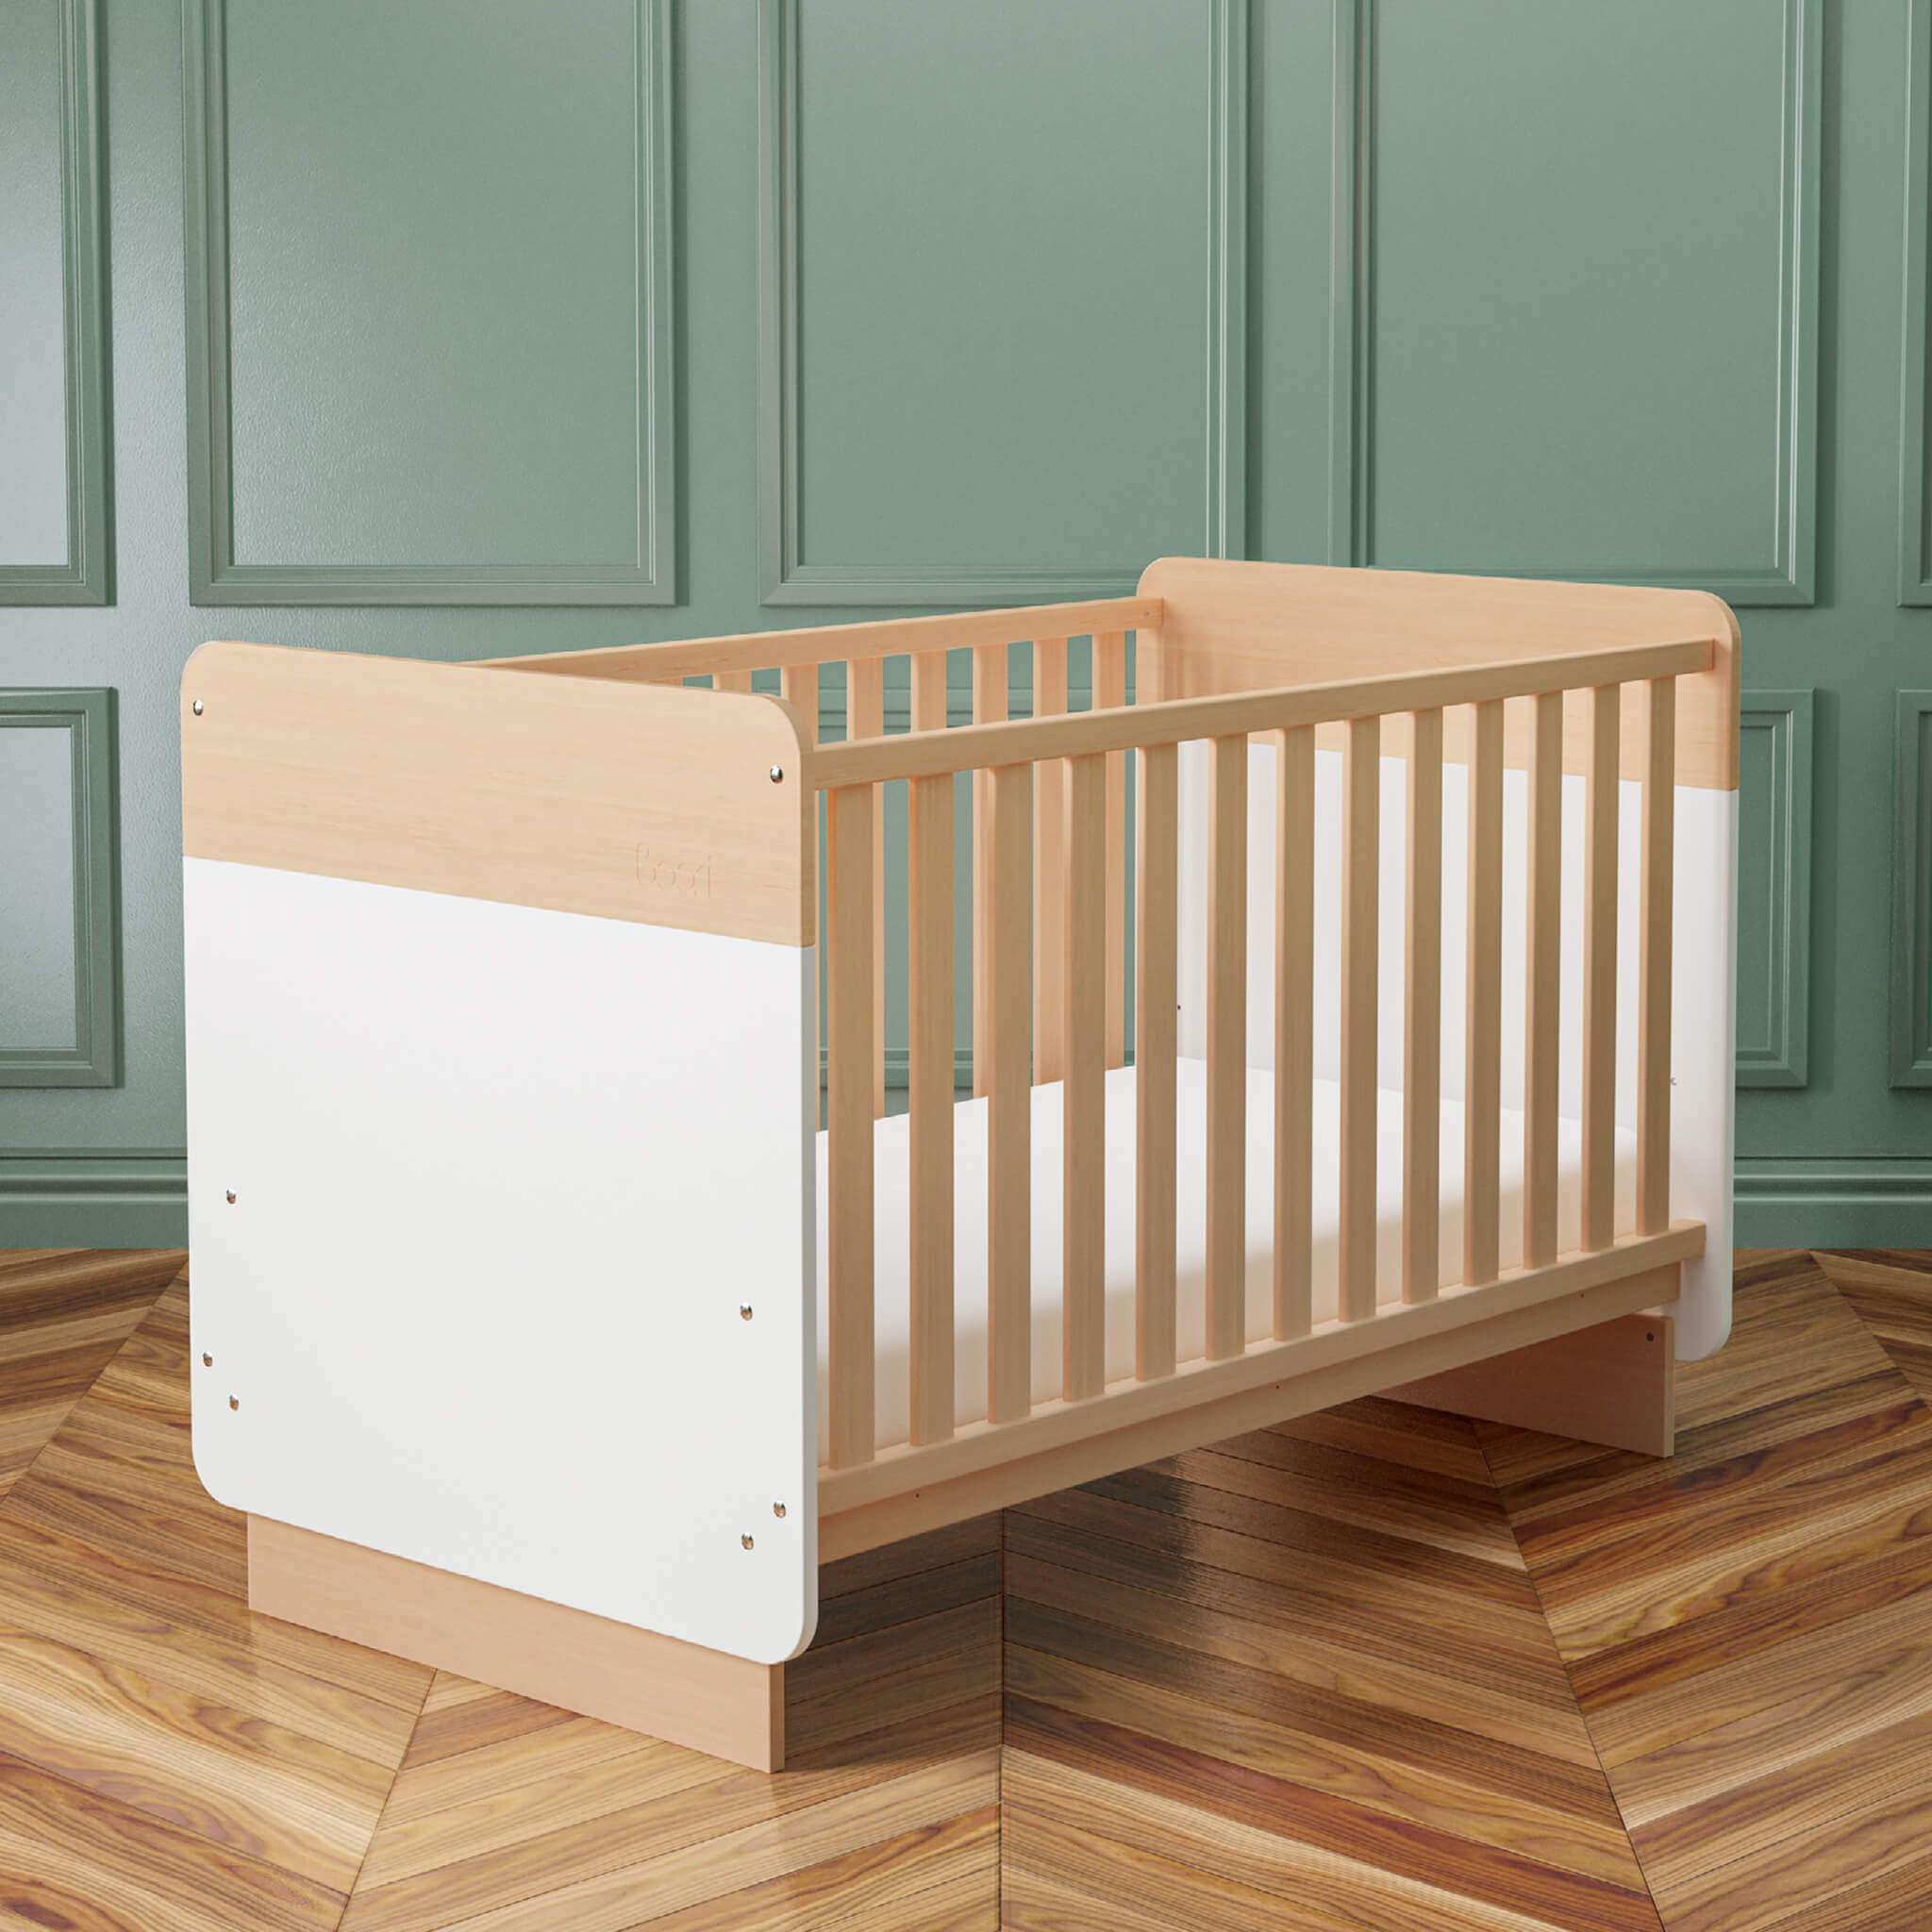 Cot Beds - Convertible & Sustainable – Boori UK